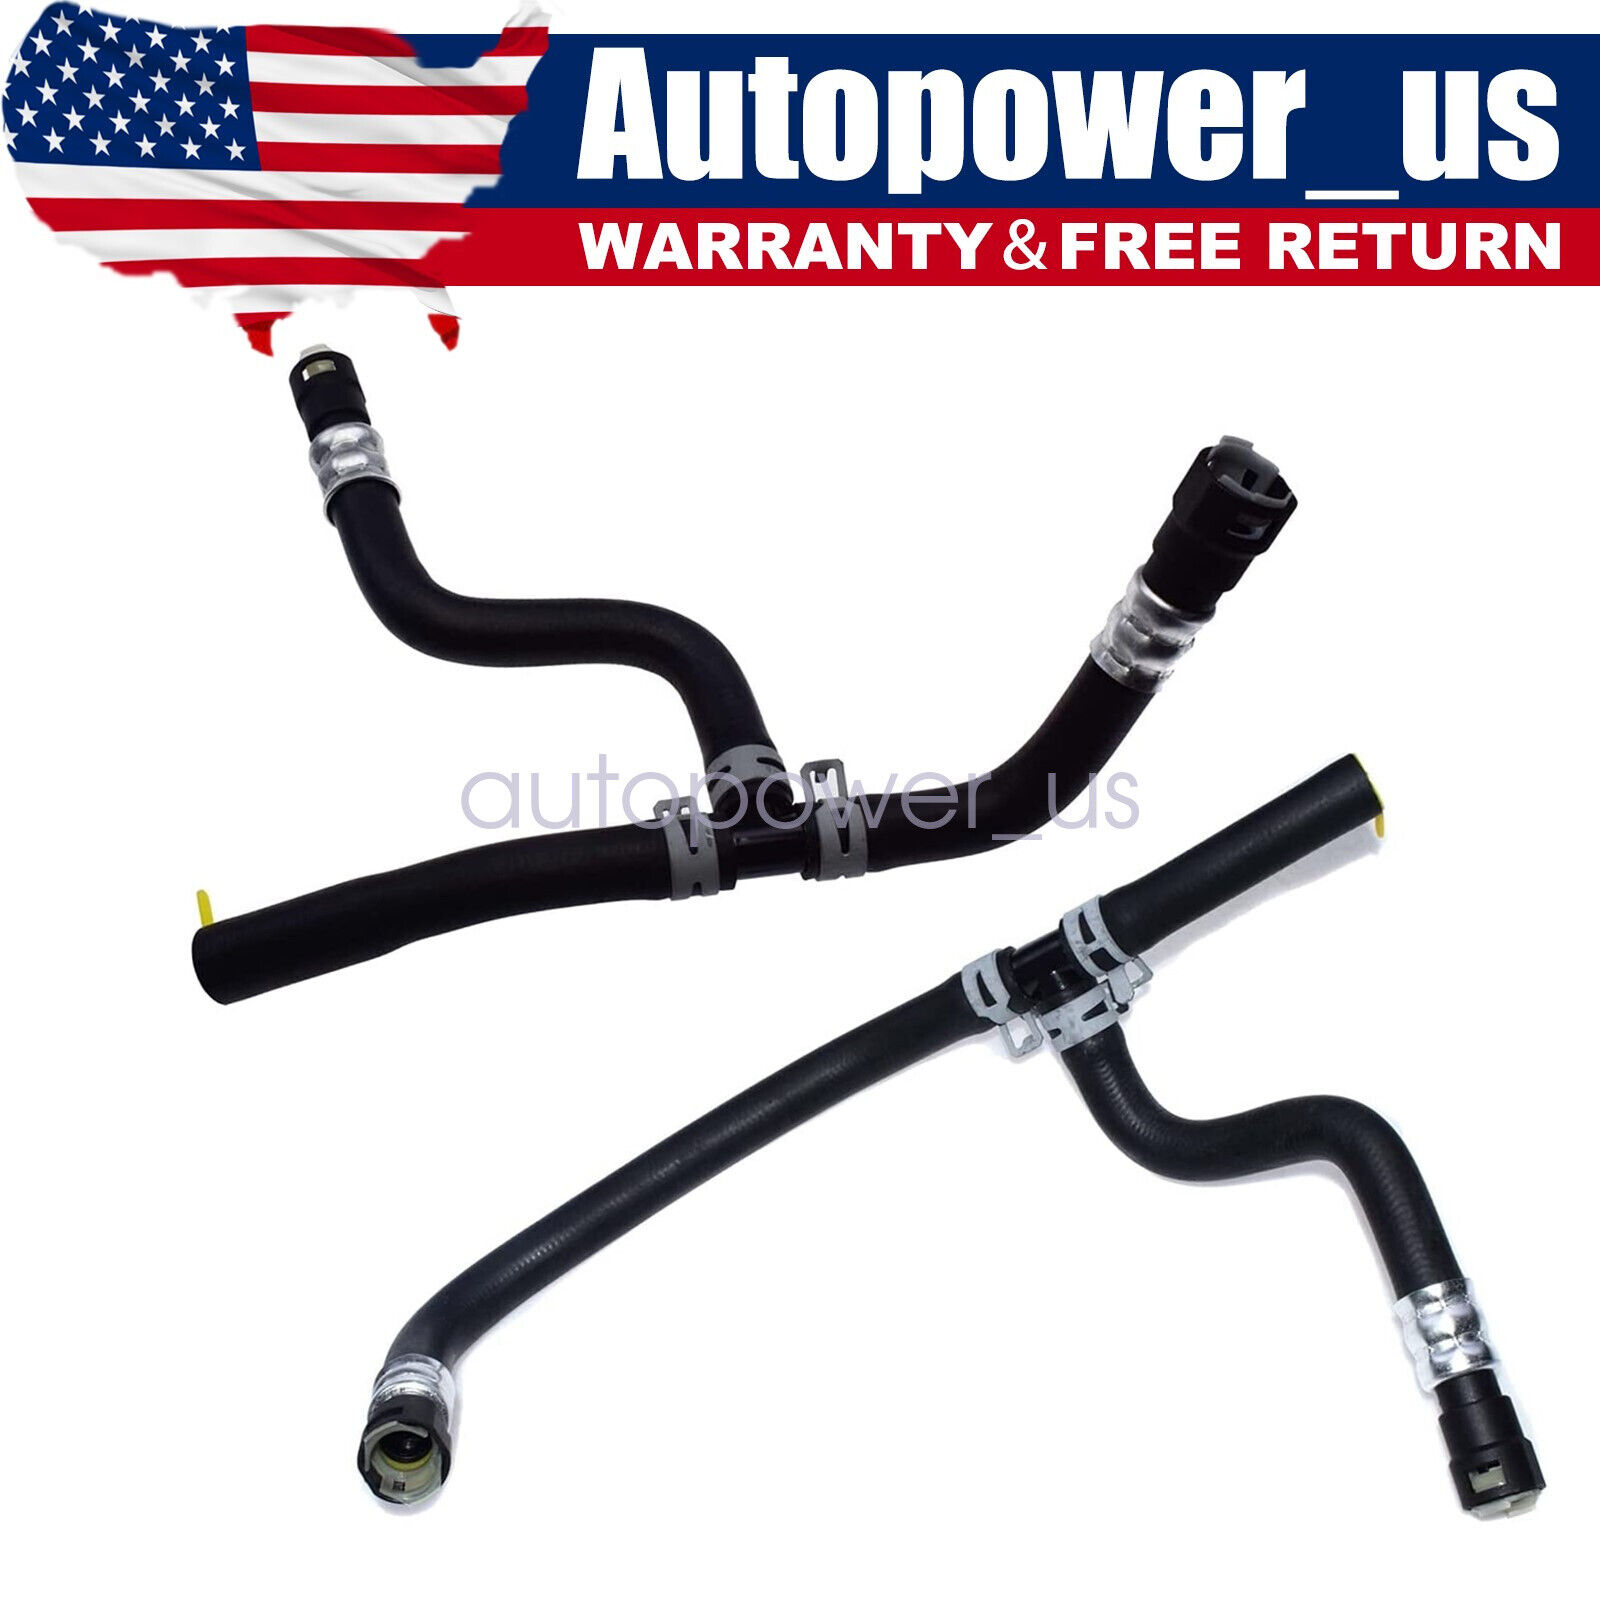 Inlet & Outlet Heater Hose For Buick Enclave Chevrolet Traverse GMC Acadia 3.6L